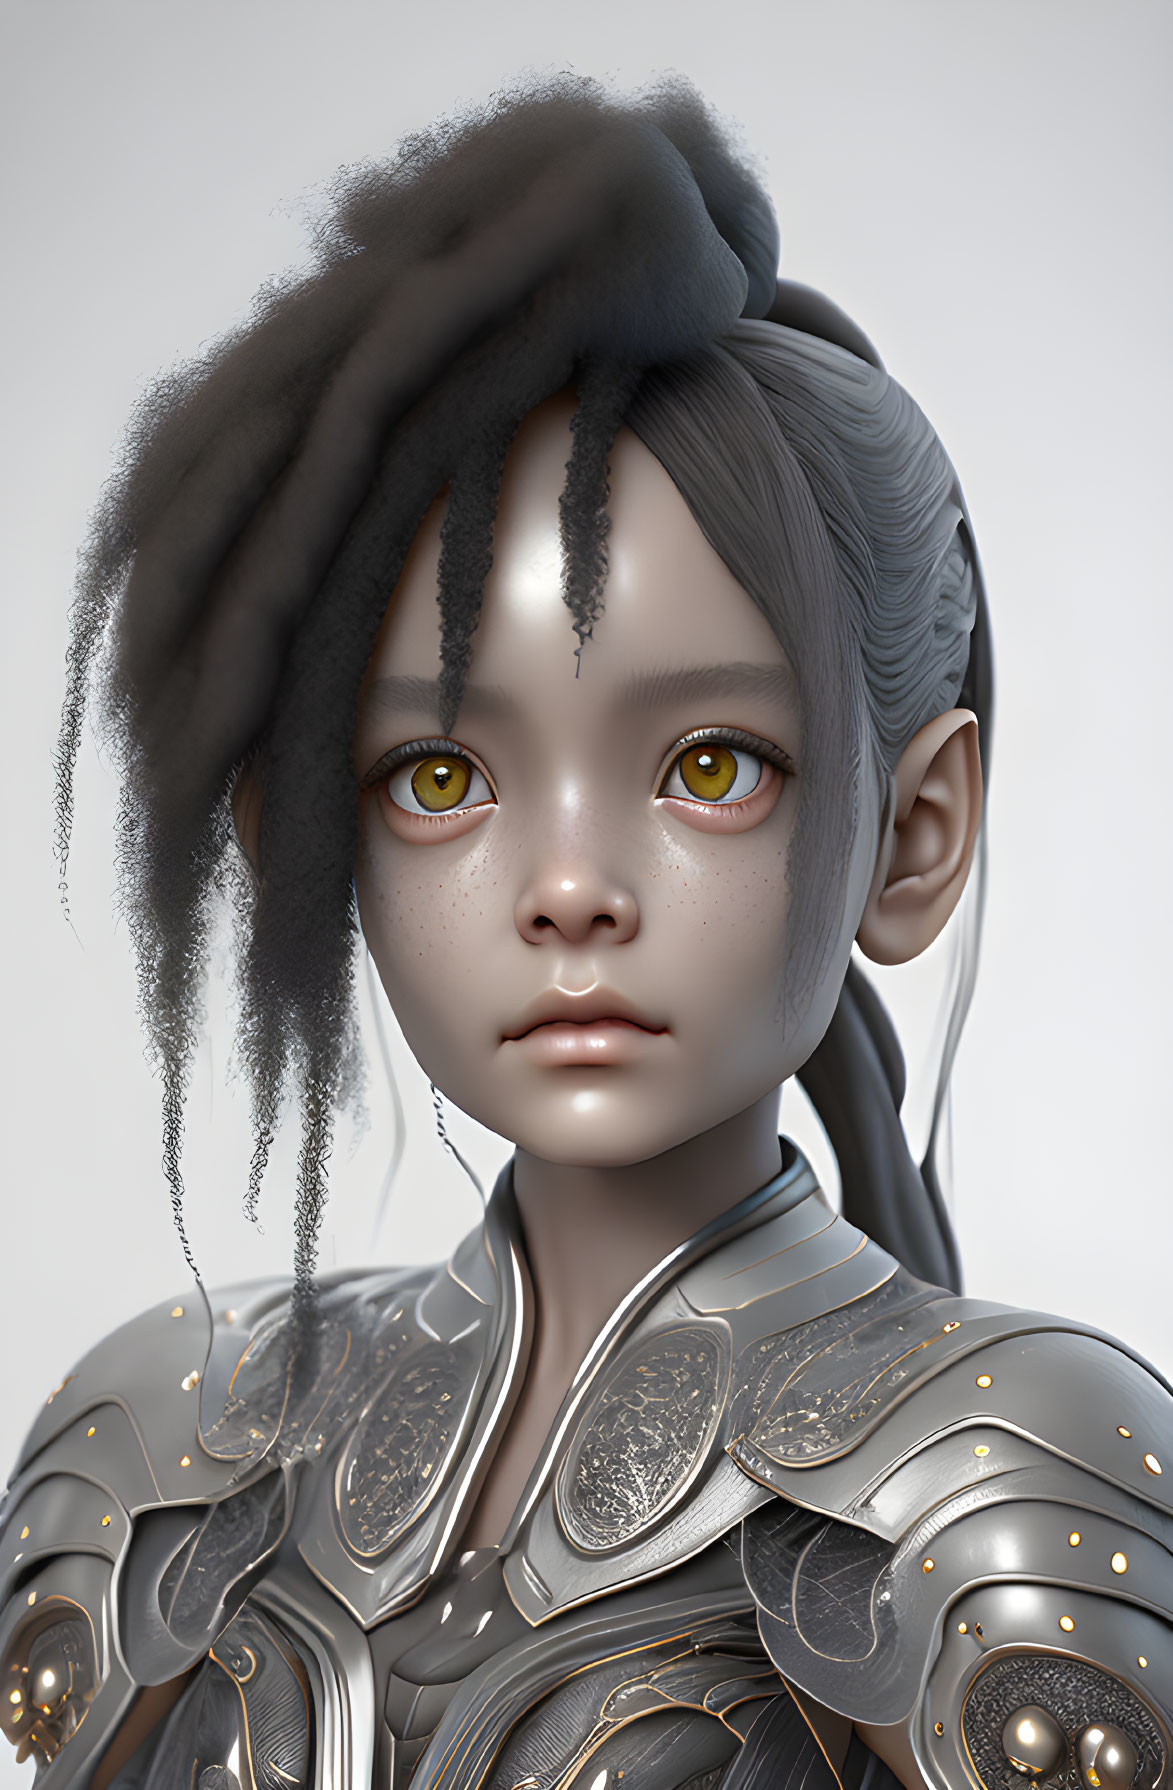 Fantasy character digital portrait with yellow eyes, grey braided hair, and silver armor